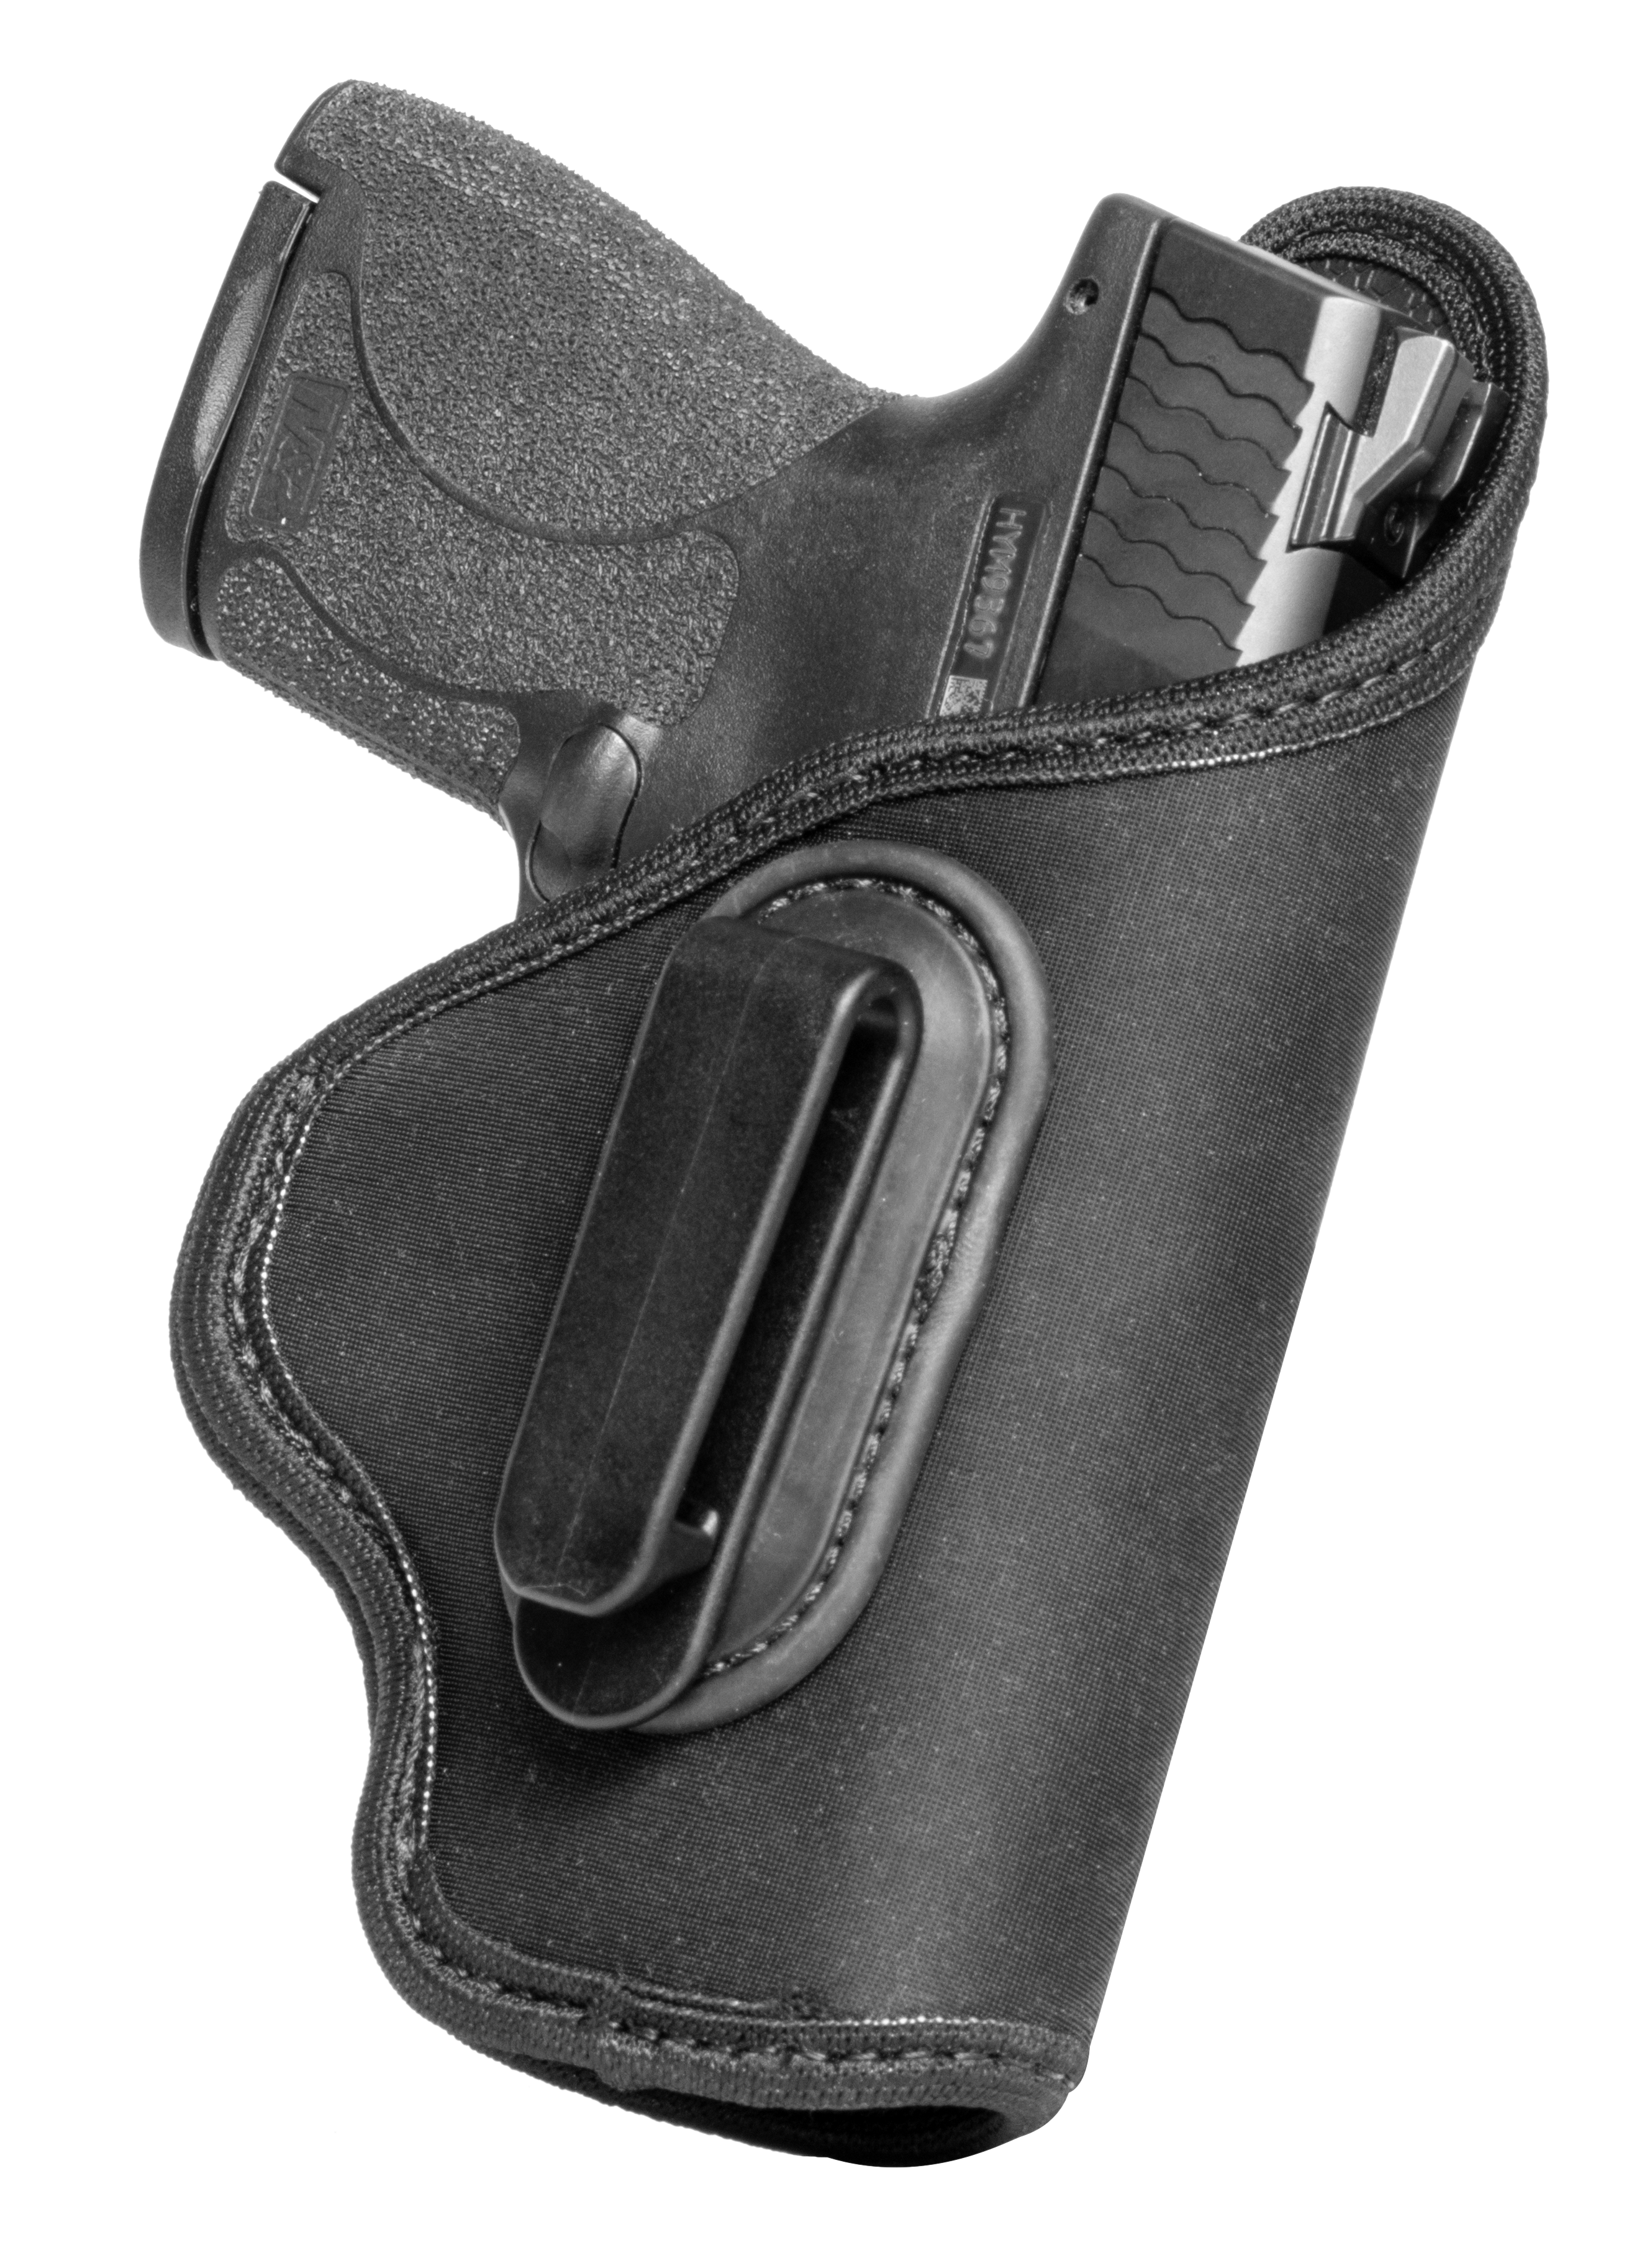 Alien Gear Grip Tuck Holster - Micro - Ruger LCP/SIG P238